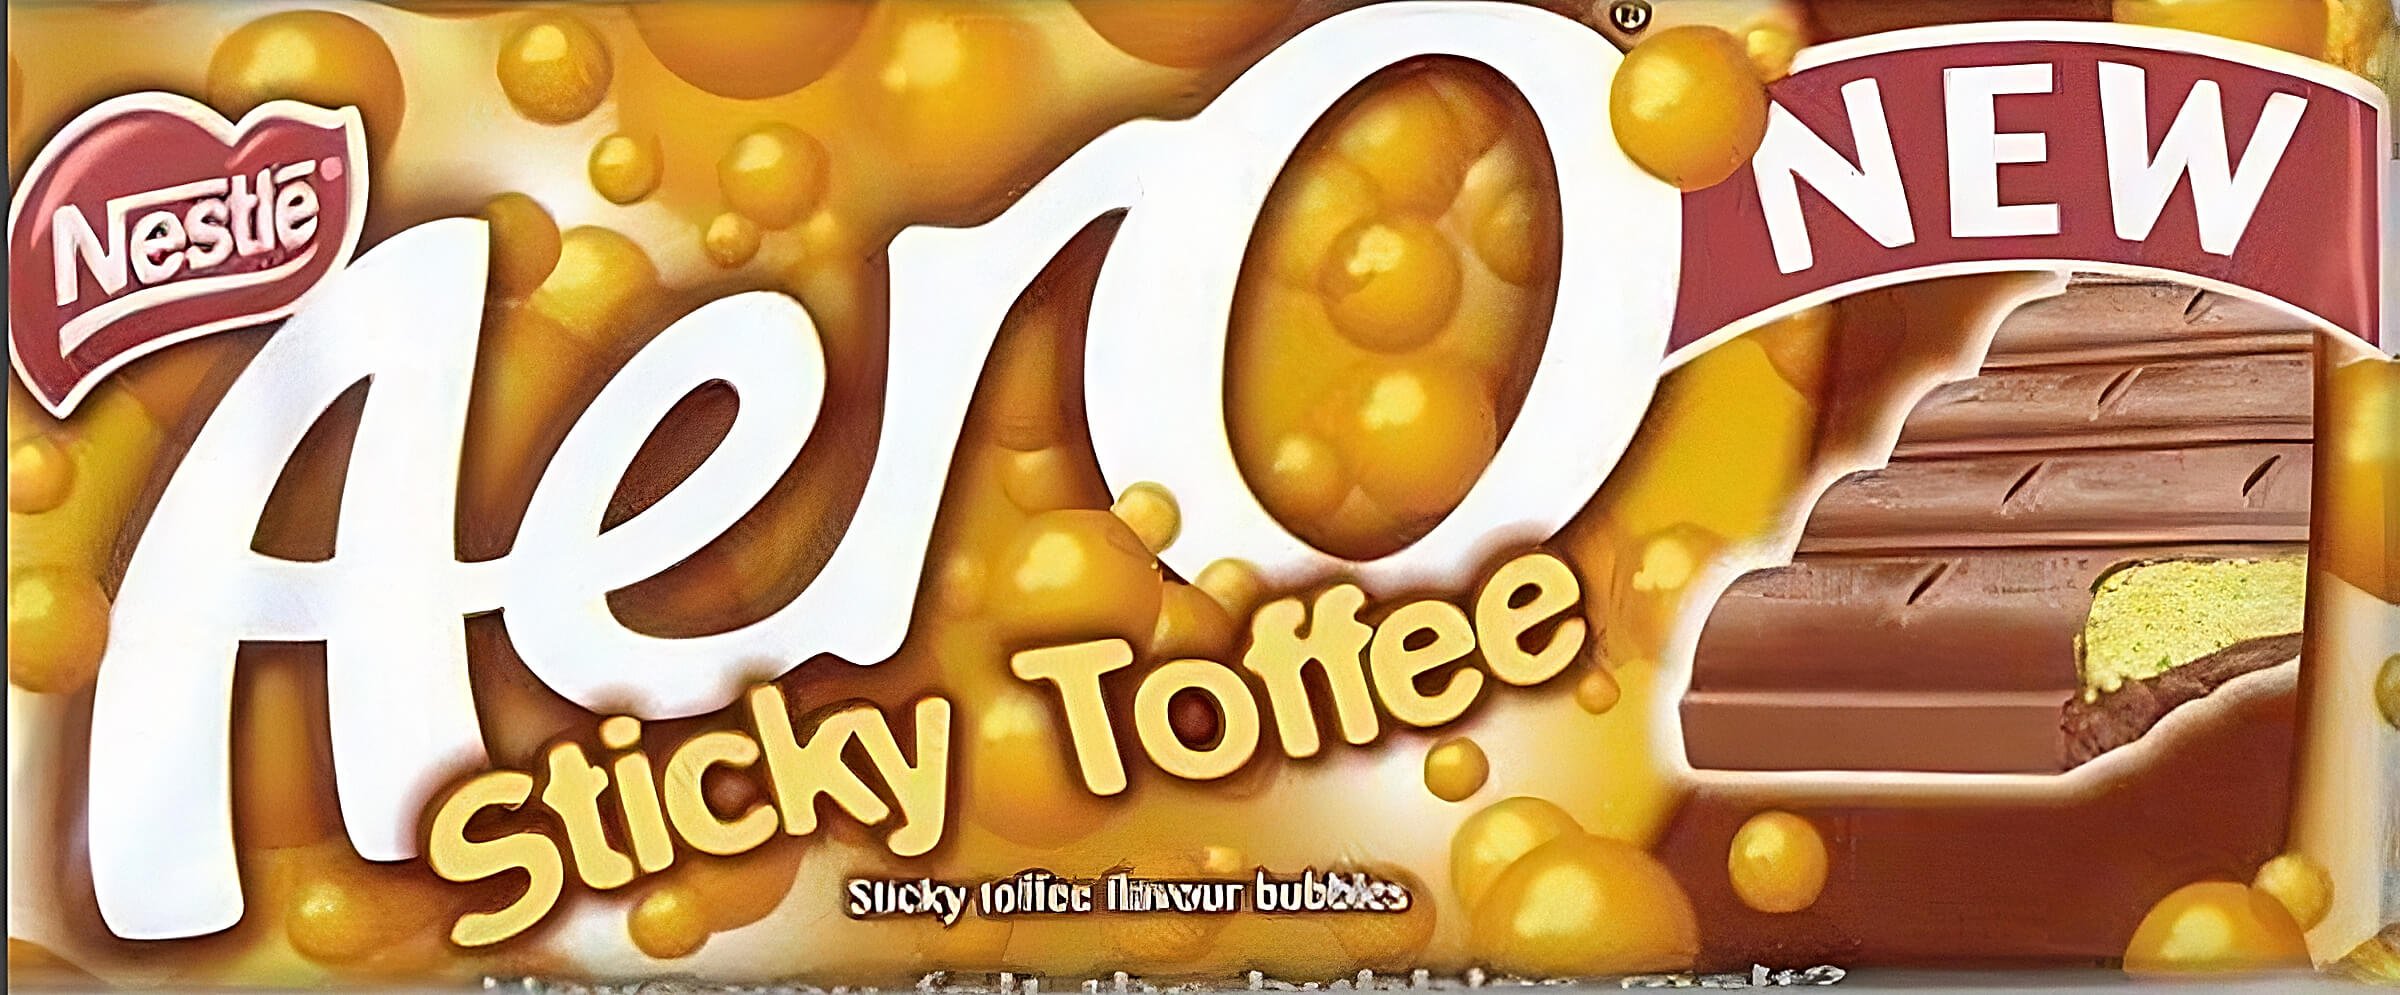 Aero Sticky Toffee Chocolate Bar from 2005 with golden coloured wrapper with bubbles